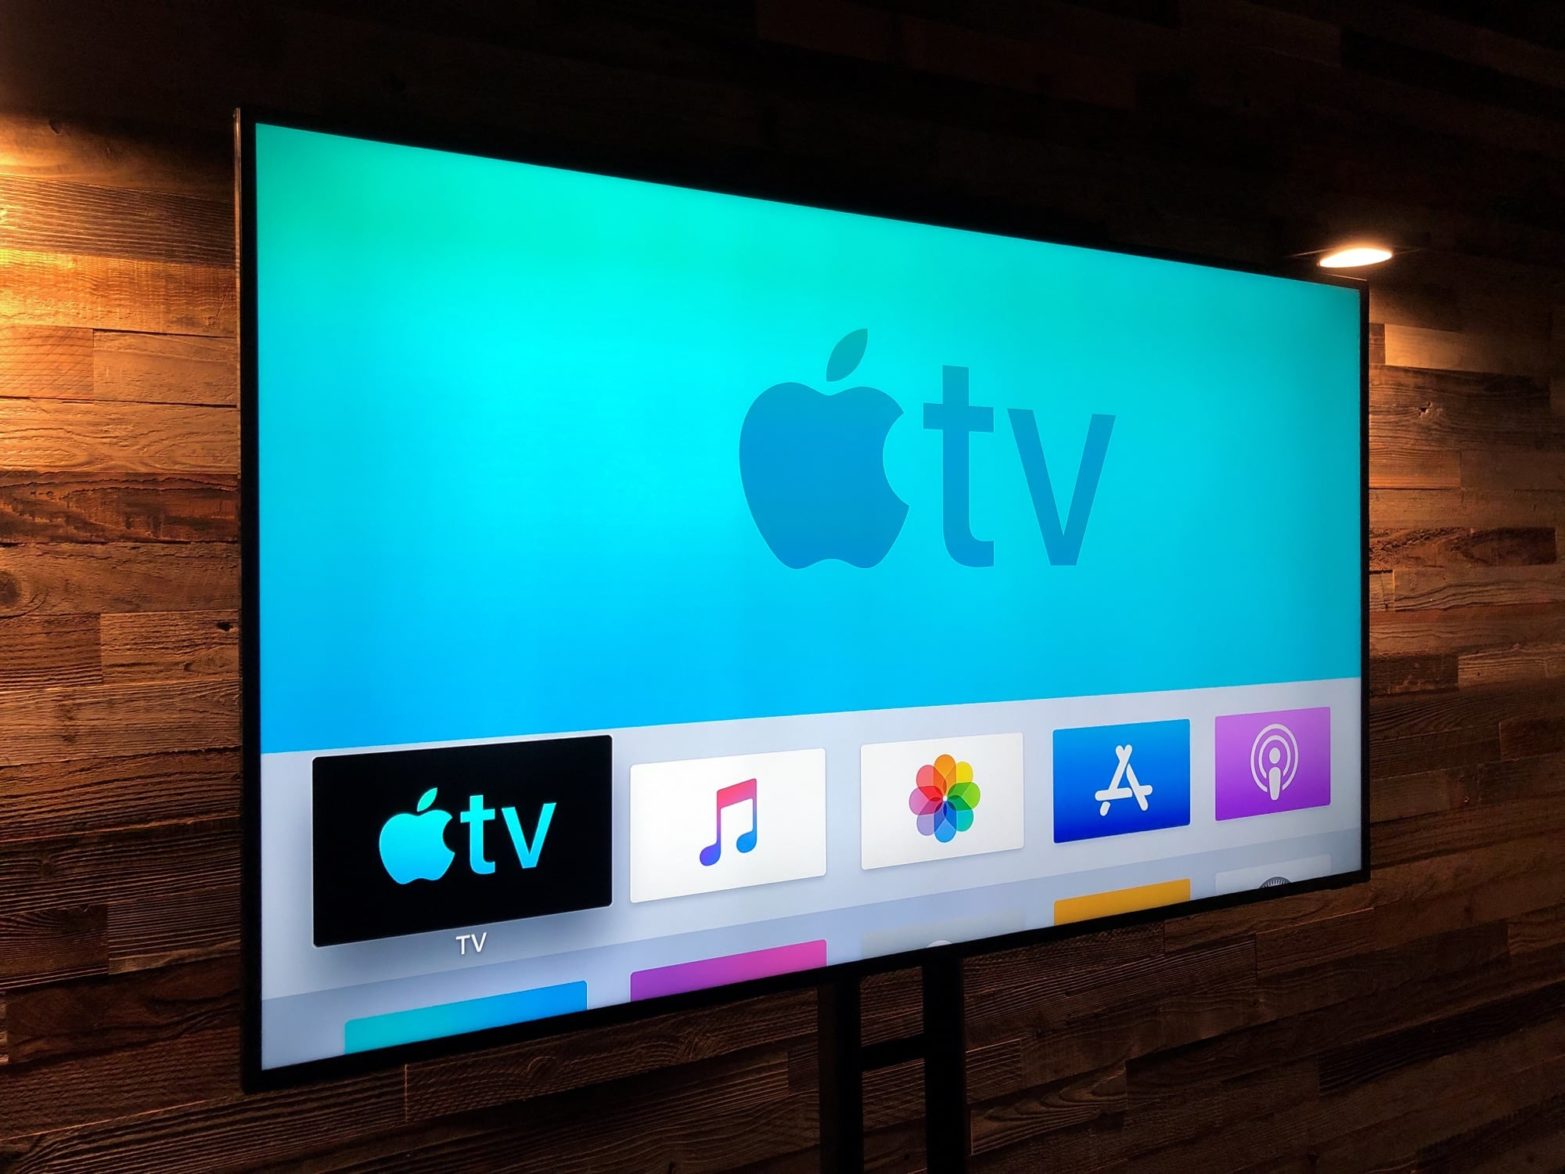 New Apple TV 4K hardware appears closer to launching based 